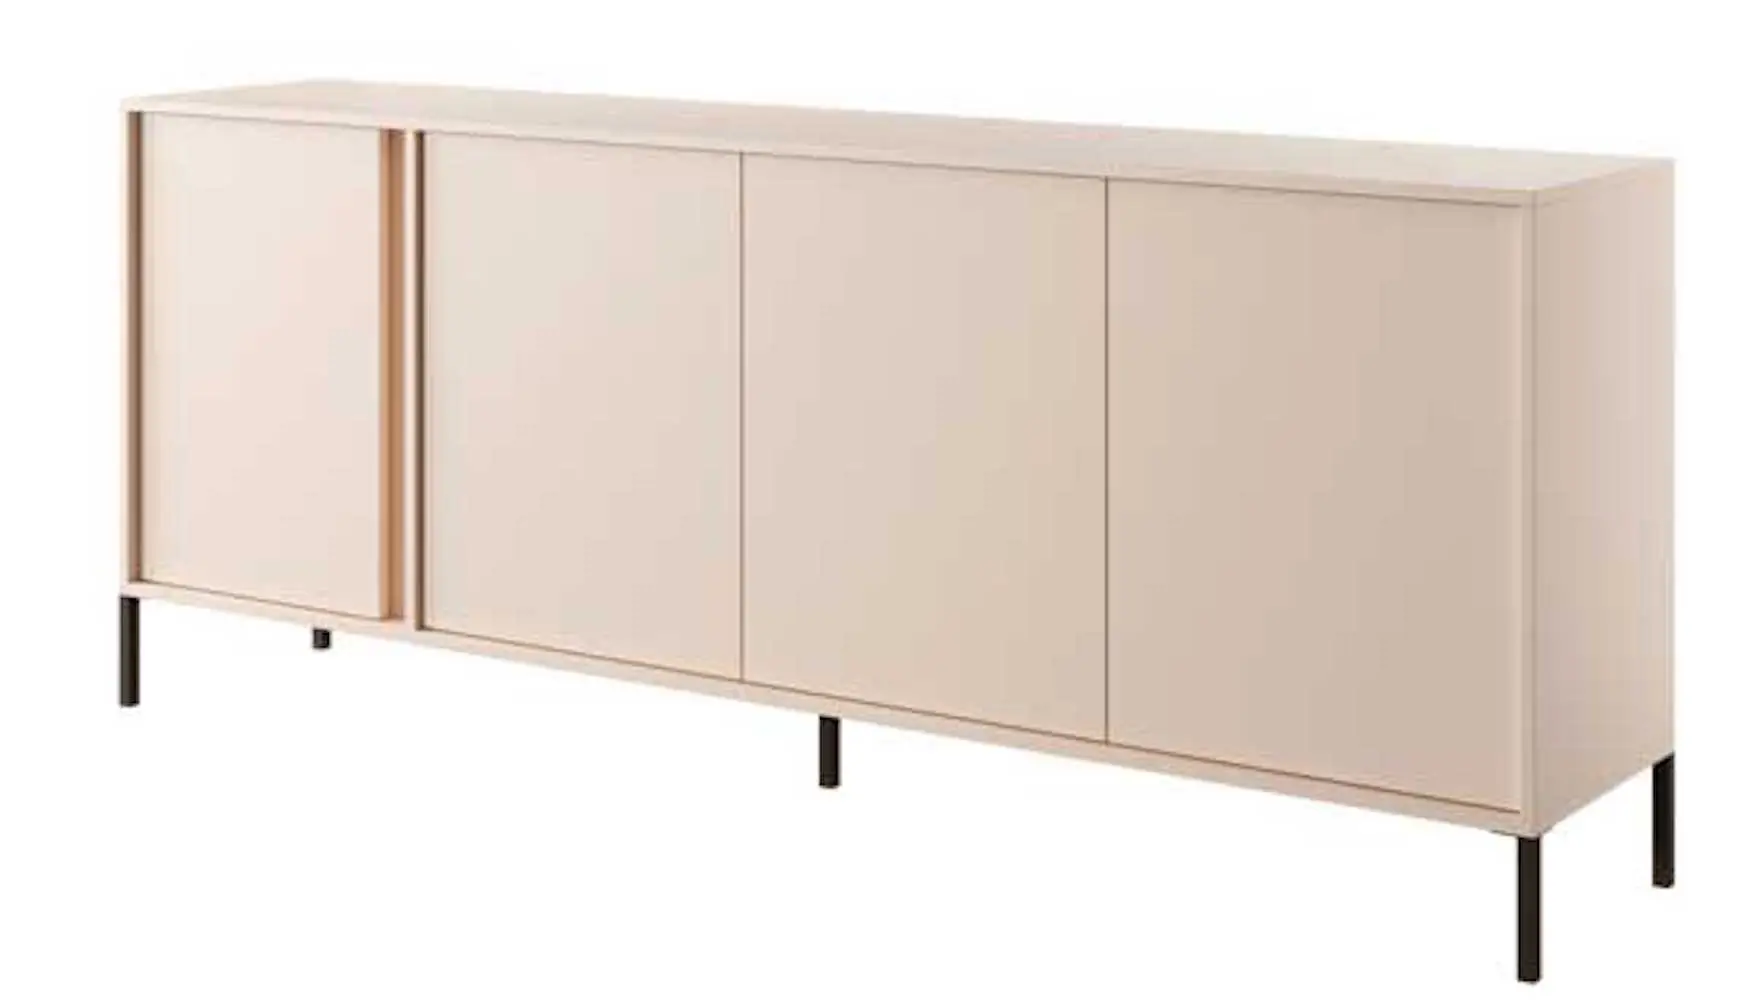 Sideboard DAST LED-Beleuchtung mit